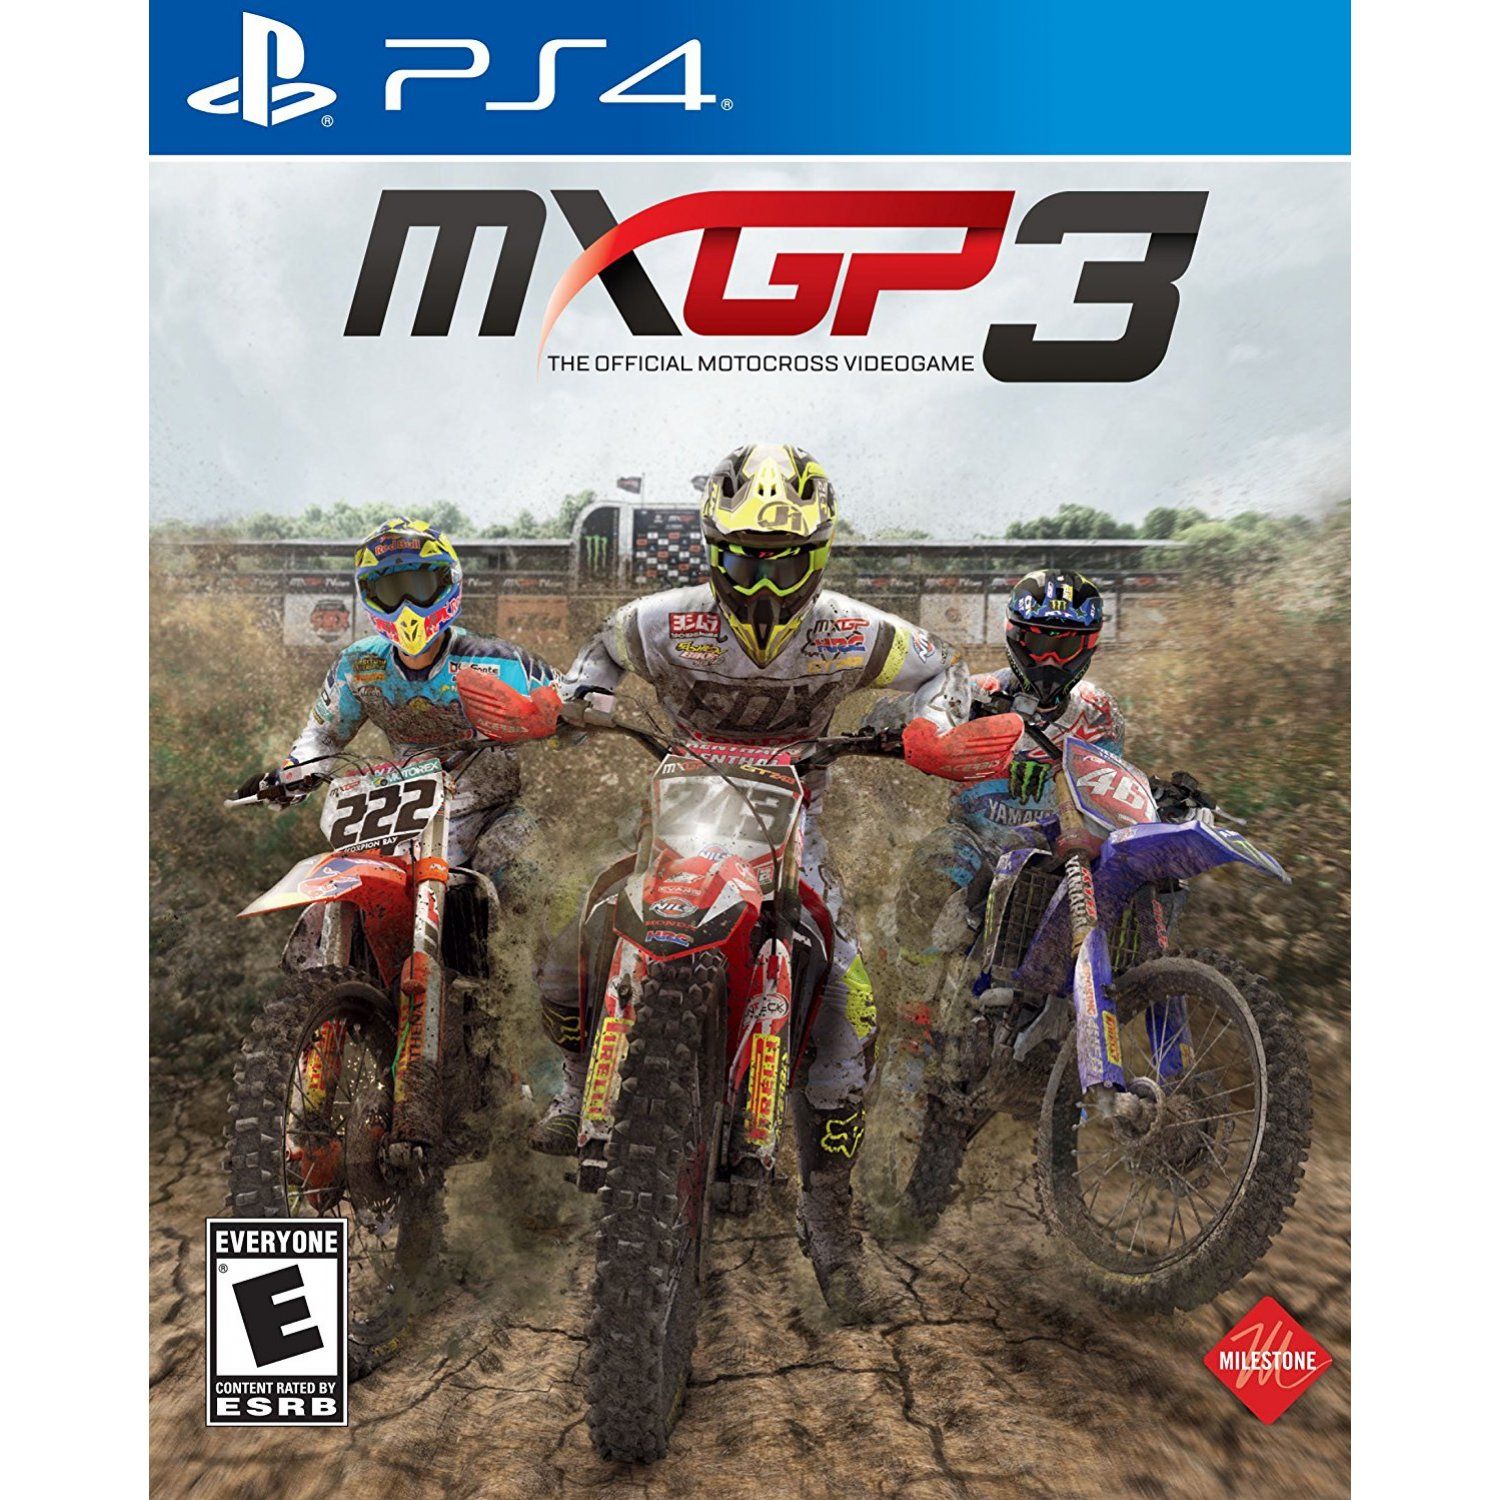 Best Motocross Game For Xbox One